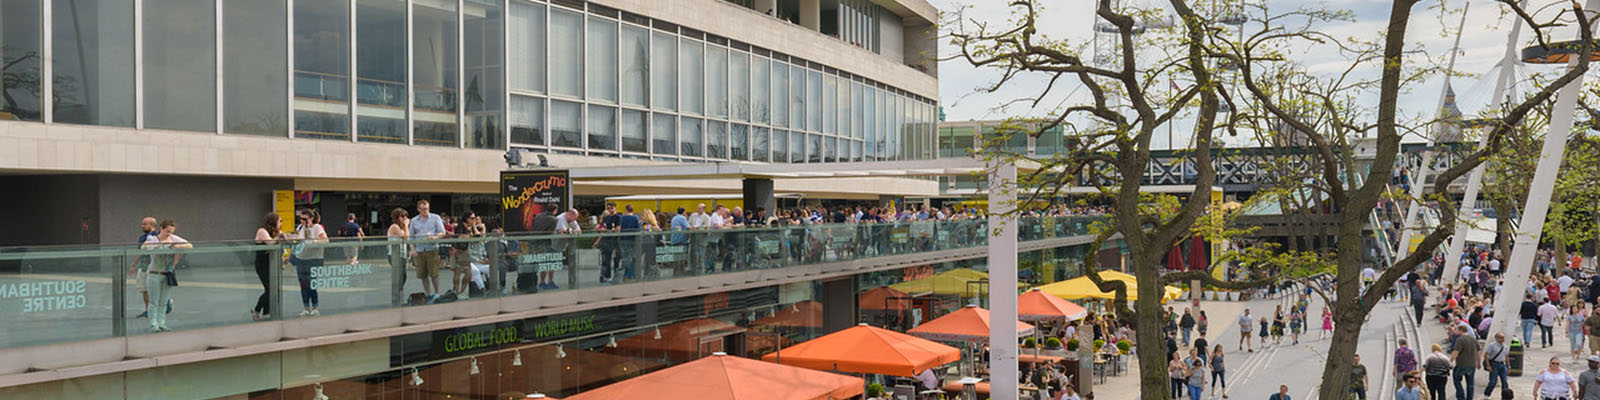 Crowds of people are milling around outside the Southbank Centre in a hive of activity; a view of orange square market stall canopies stretches into the distance. Trees on the right, the London Eye and Big Ben in the far distance.